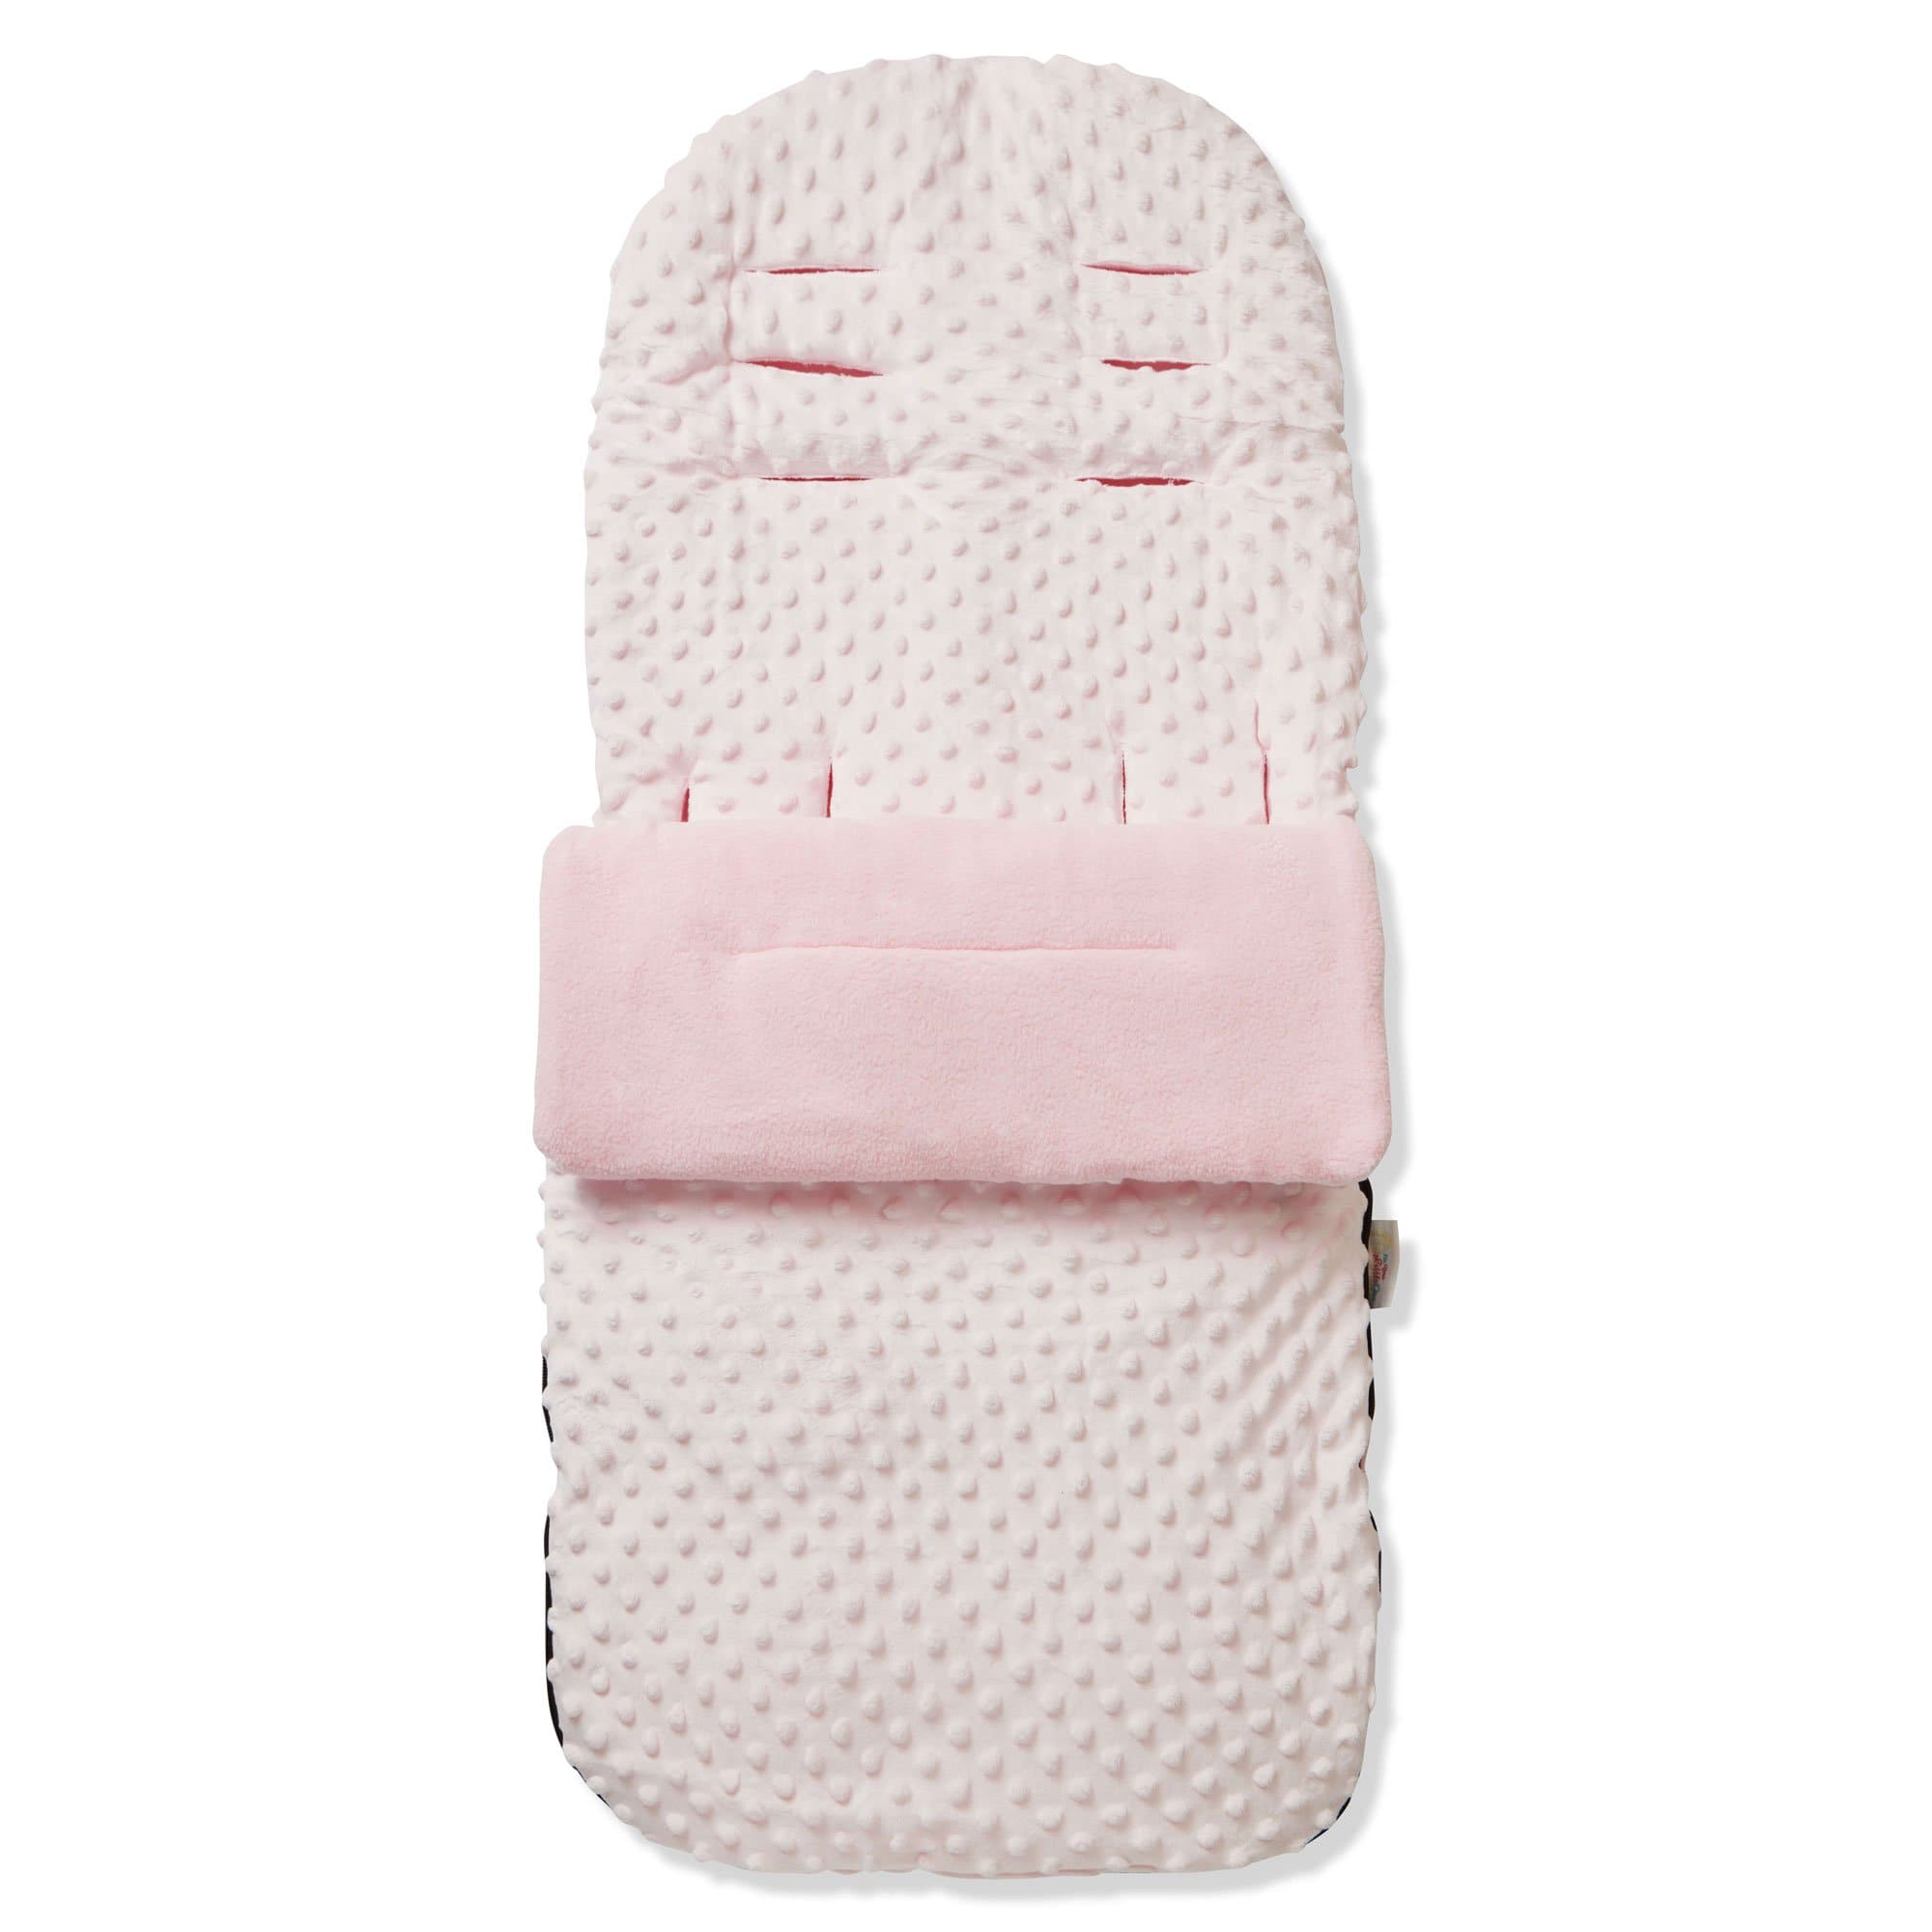 Dimple Footmuff / Cosy Toes Compatible with Zooper - Pink / Fits All Models | For Your Little One